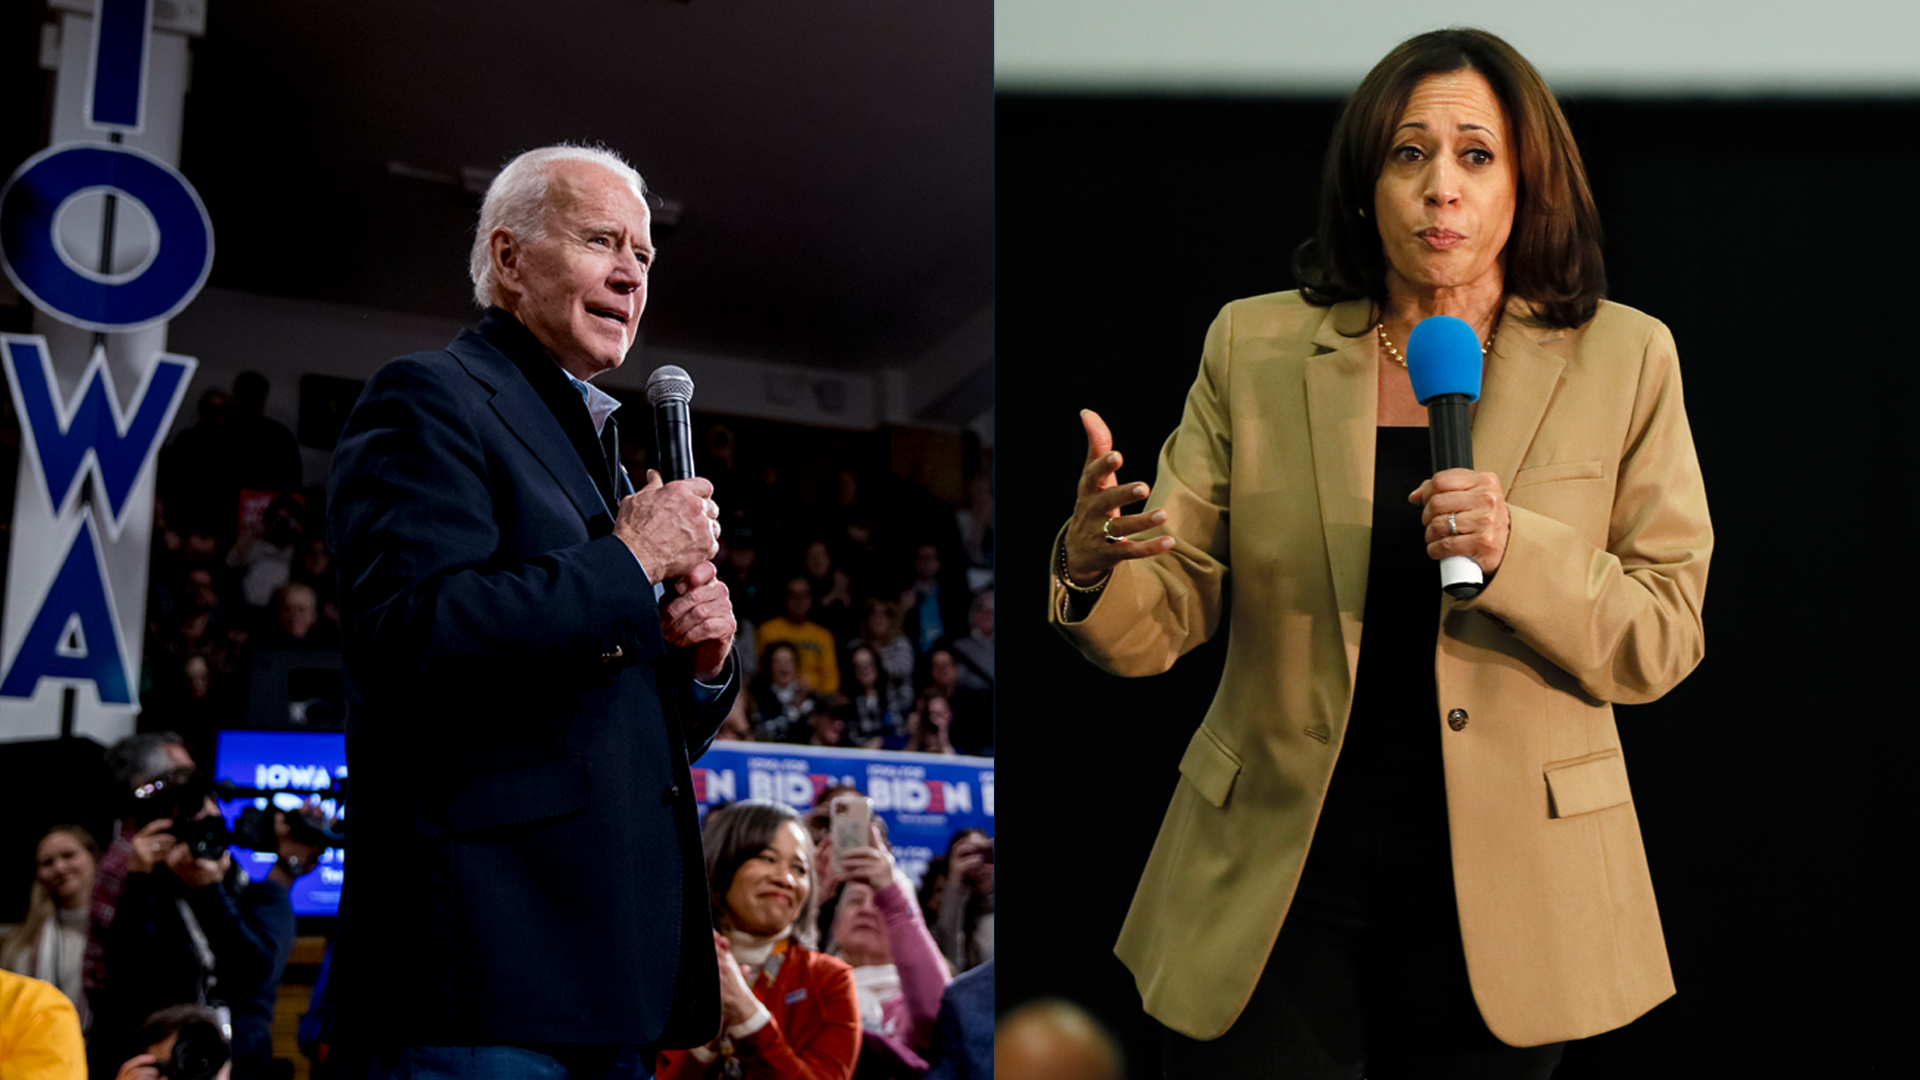 Once opponents on the 2020 campaign trail, Biden is now president and Harris vice president.